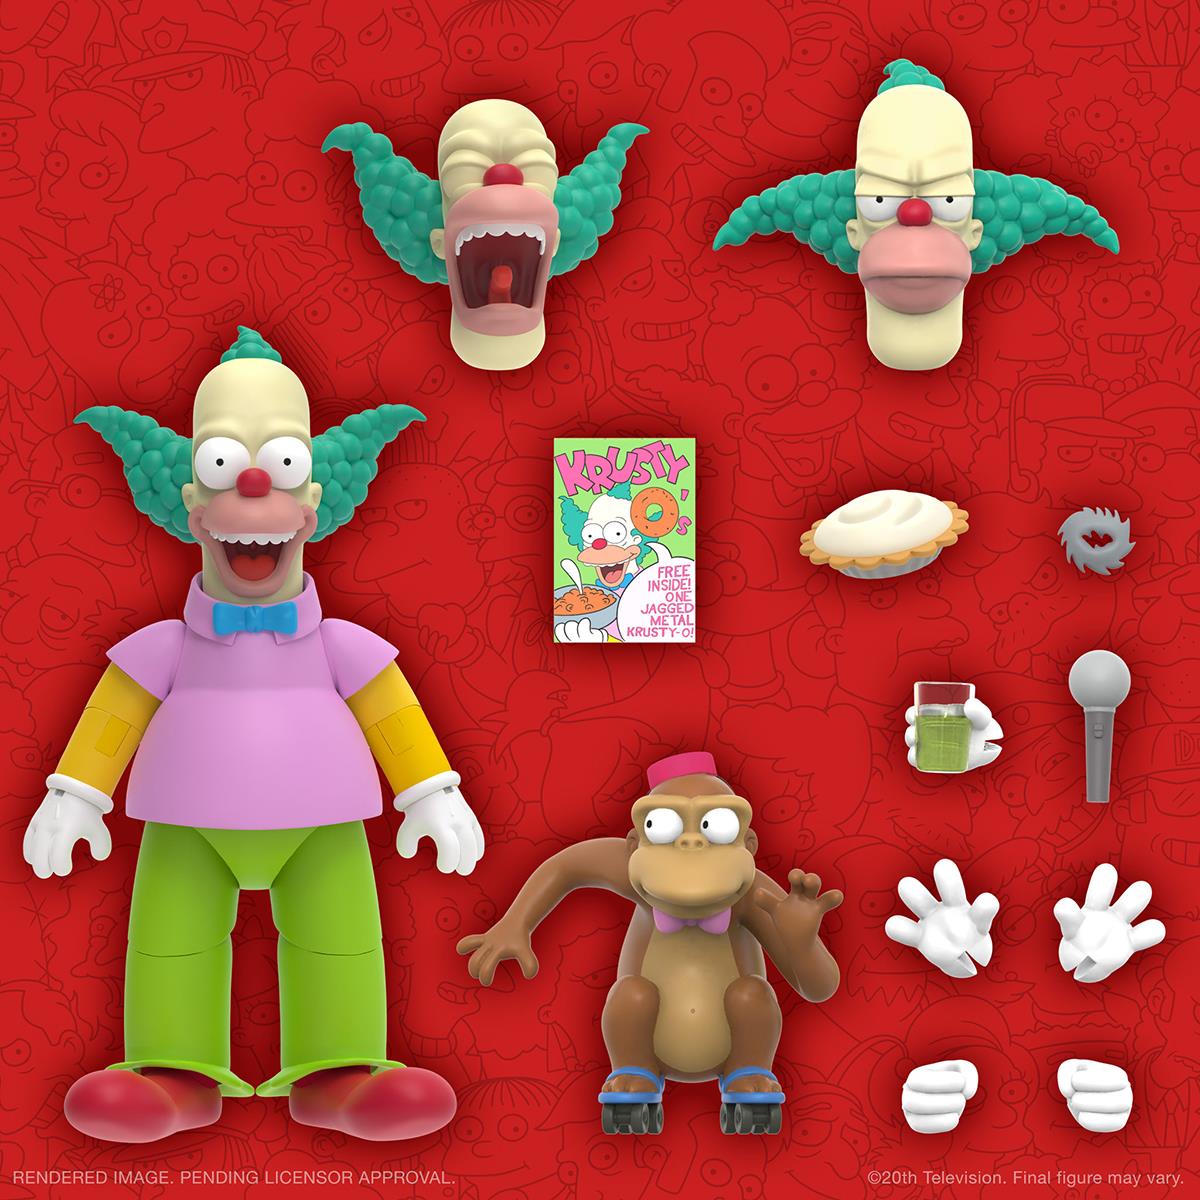 Simpsons Ultimates W2 Krusty The Clown Action Figure